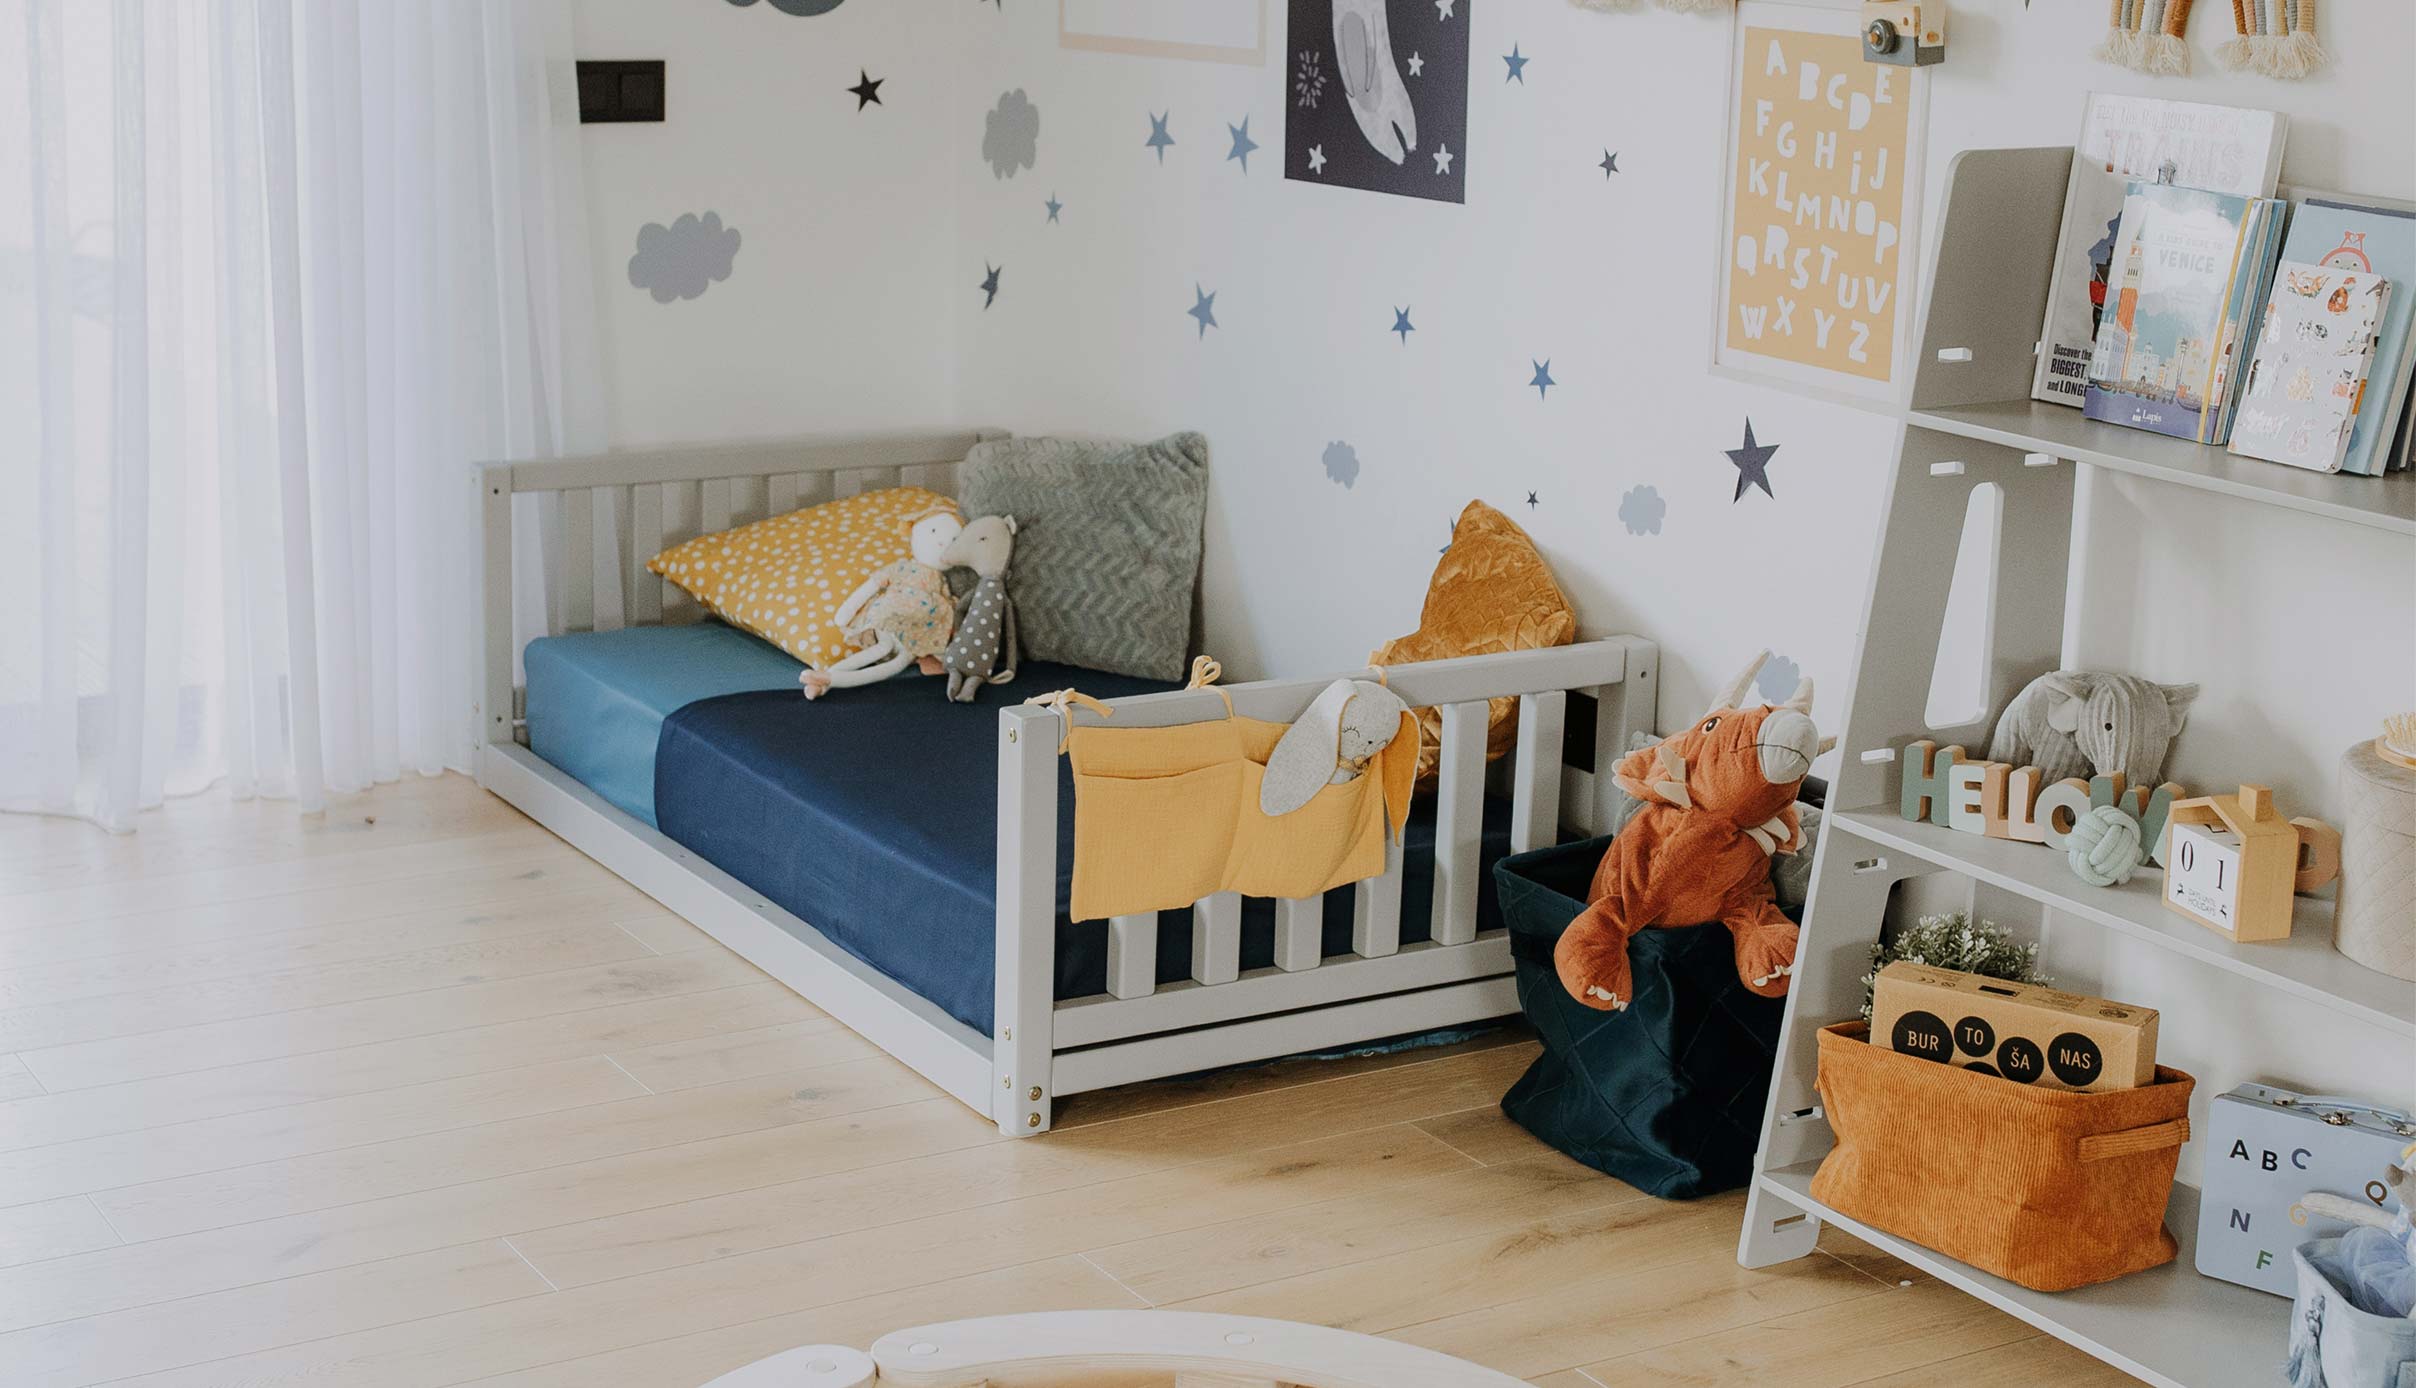 A child's room with a bed, bookshelf, and toys.